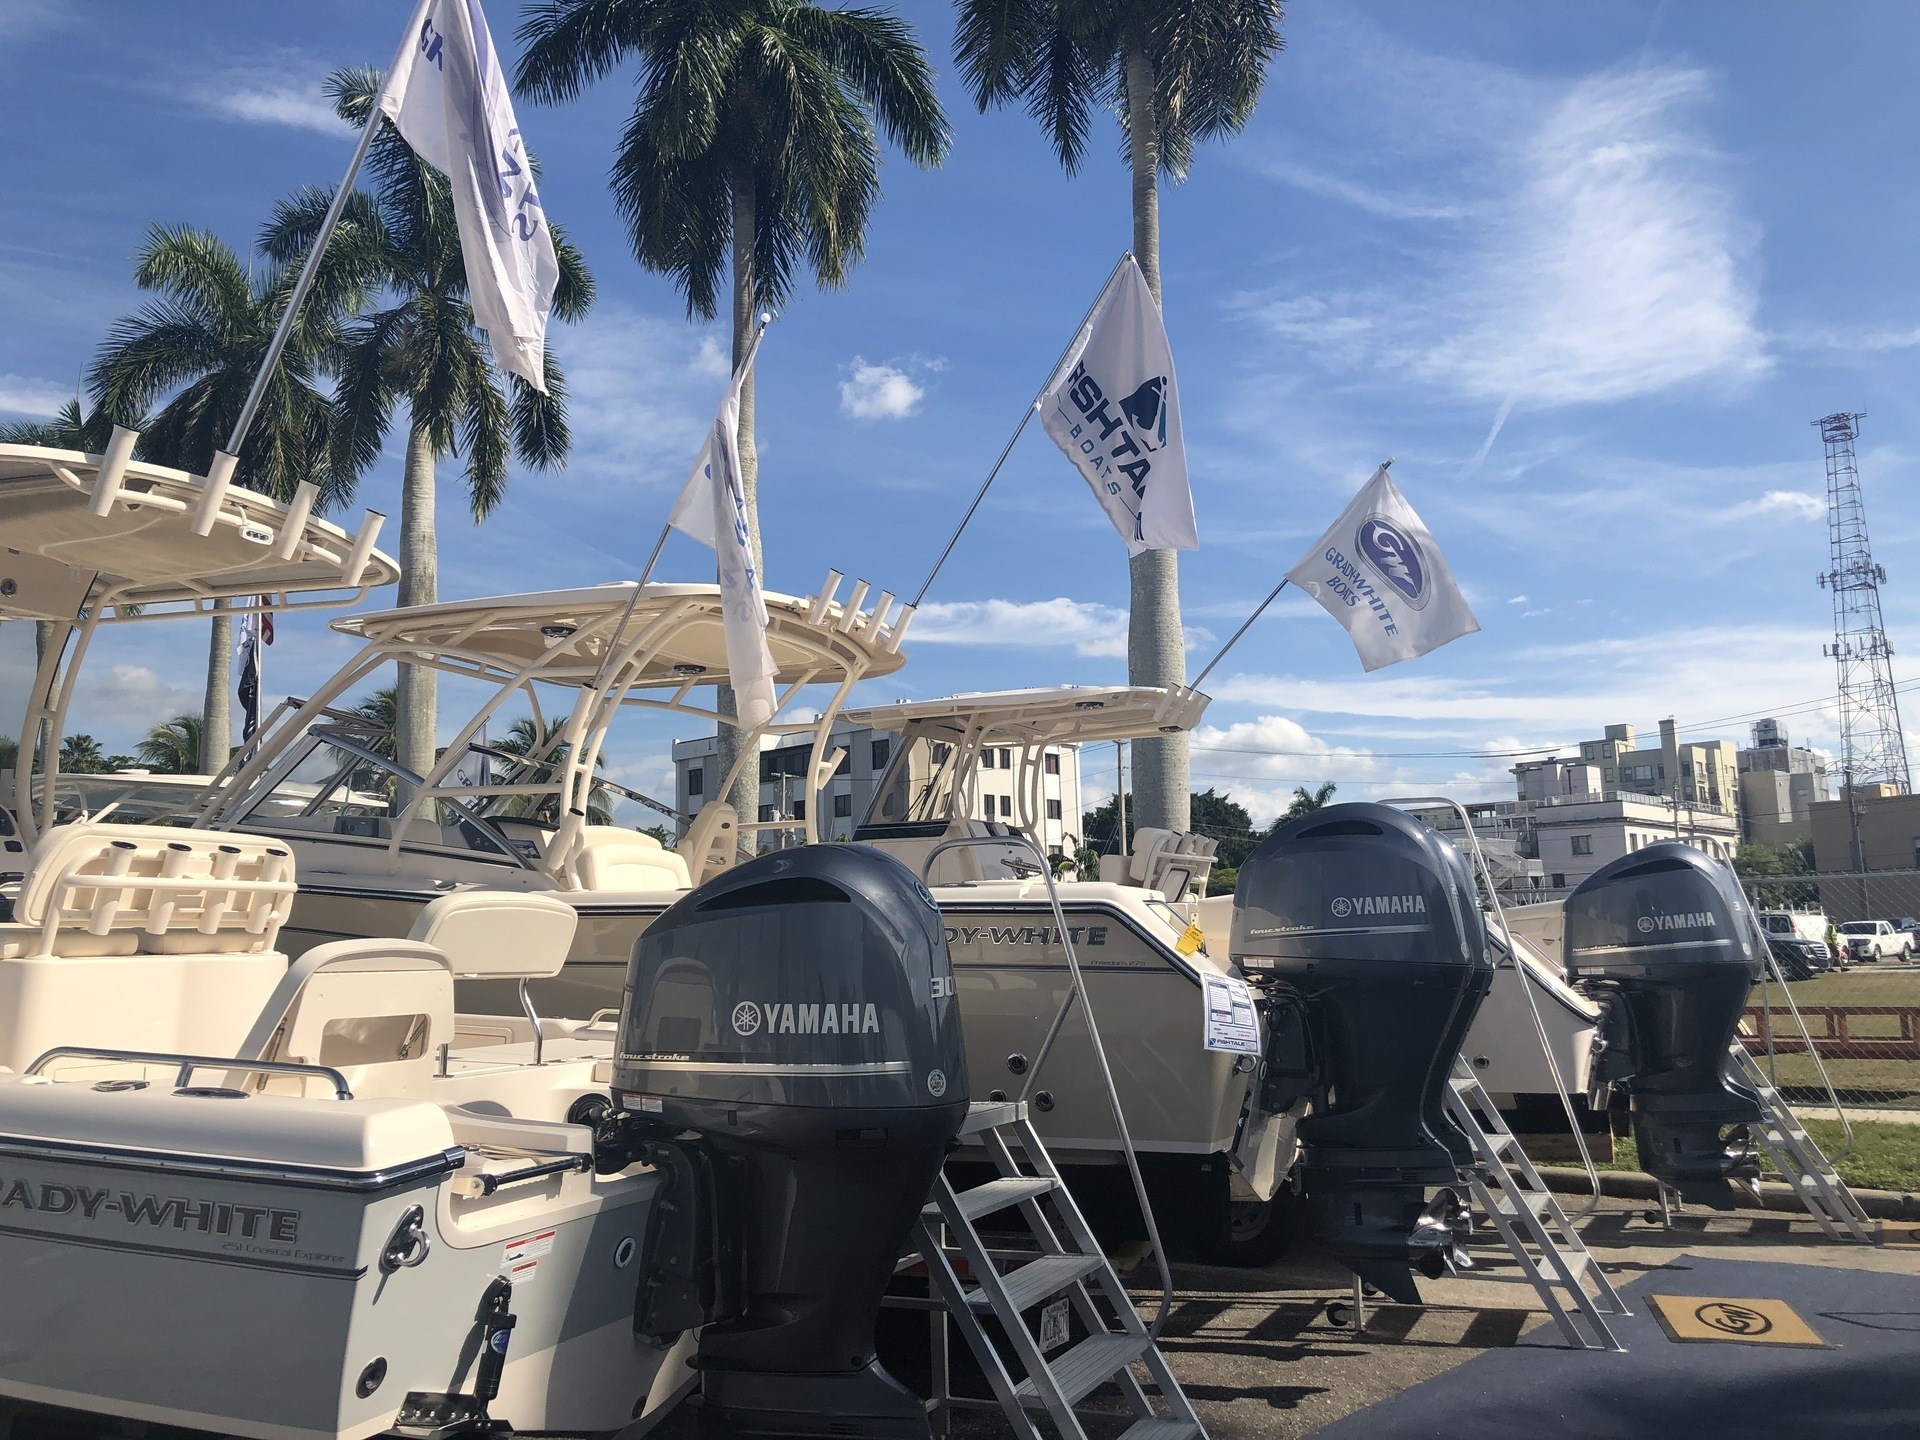 Image 2019 Fort Myers Boat Show Recap 2019 Fort Myers Boat Show Recap